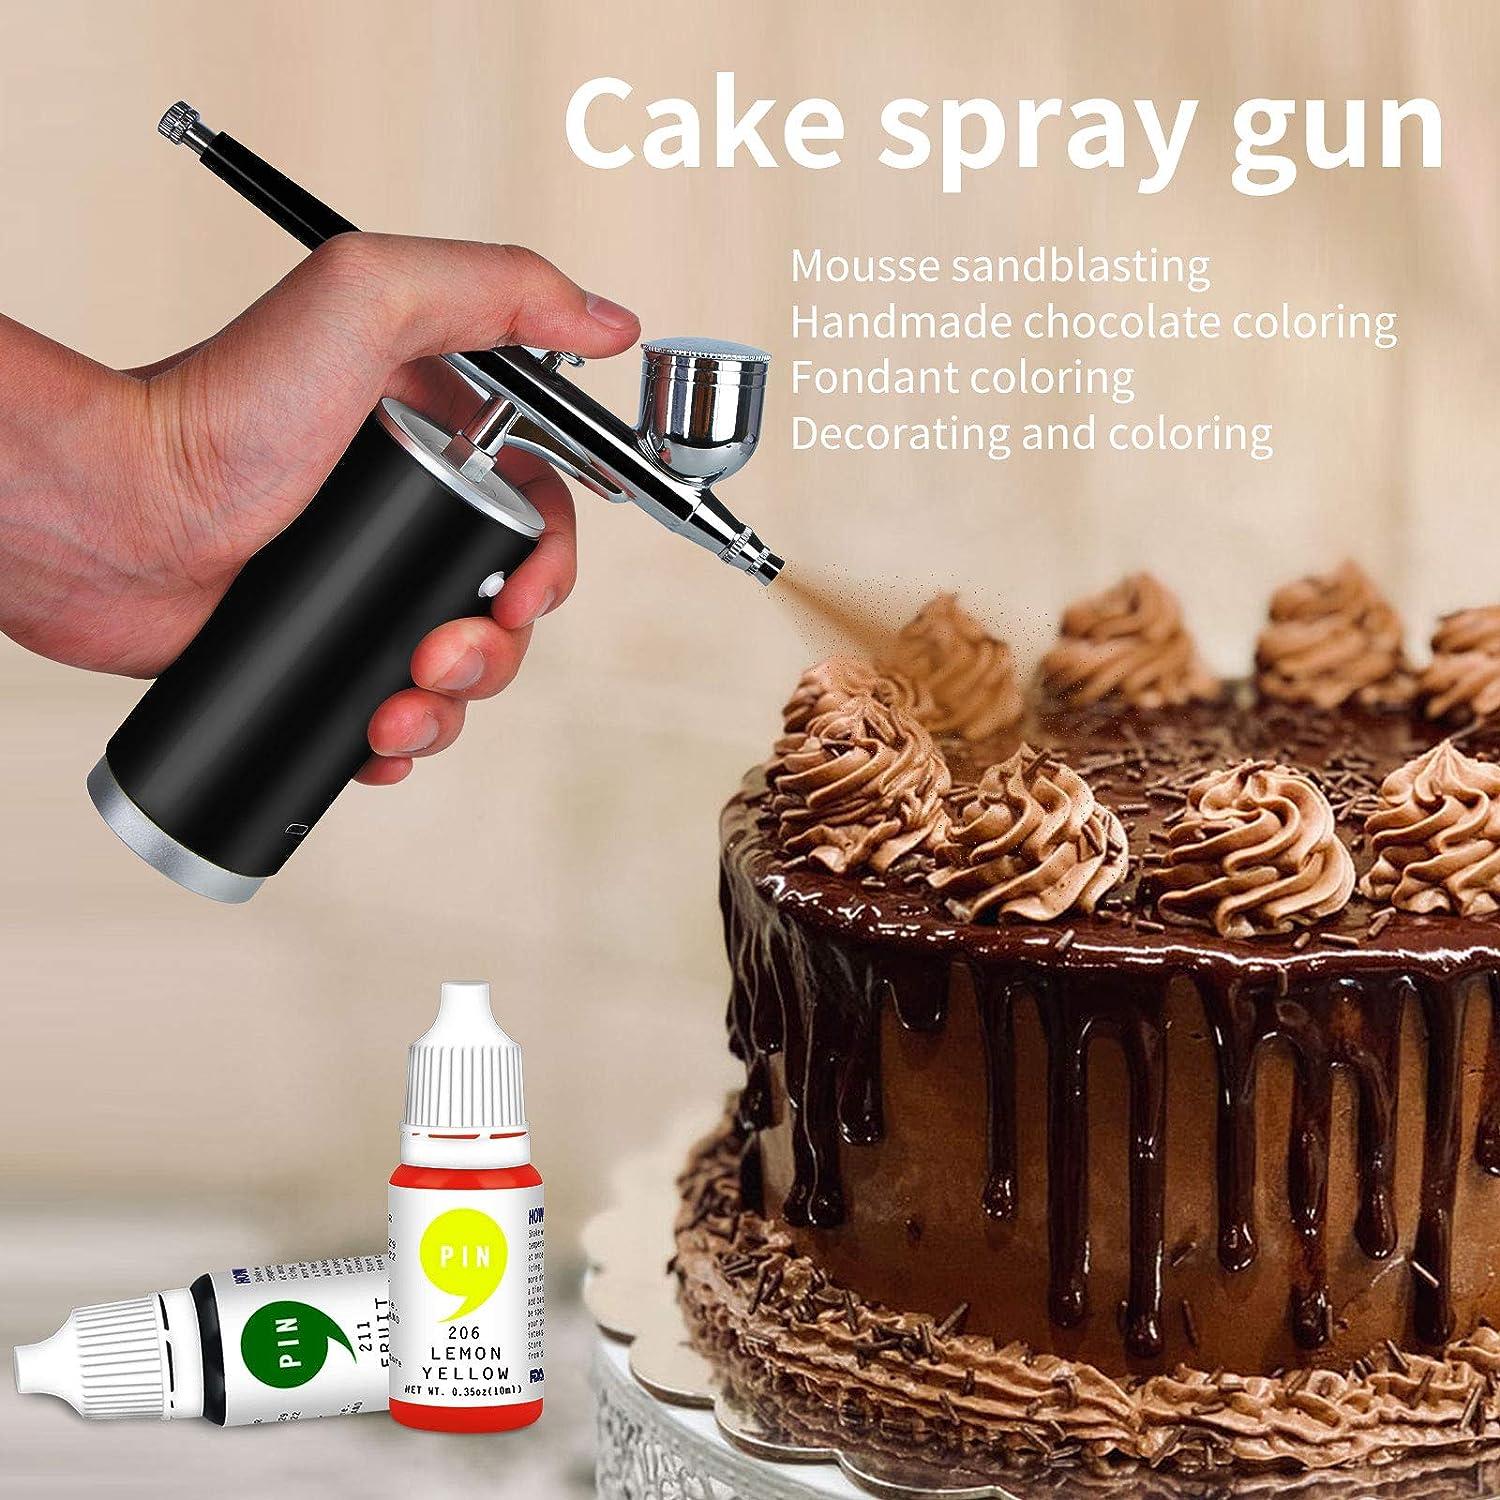 U.S. Cake Supply - Complete Cordless Handheld Airbrush Cake Decorating System, Professional Kit with A Full Selection of 12 Vivid Airbrush Food